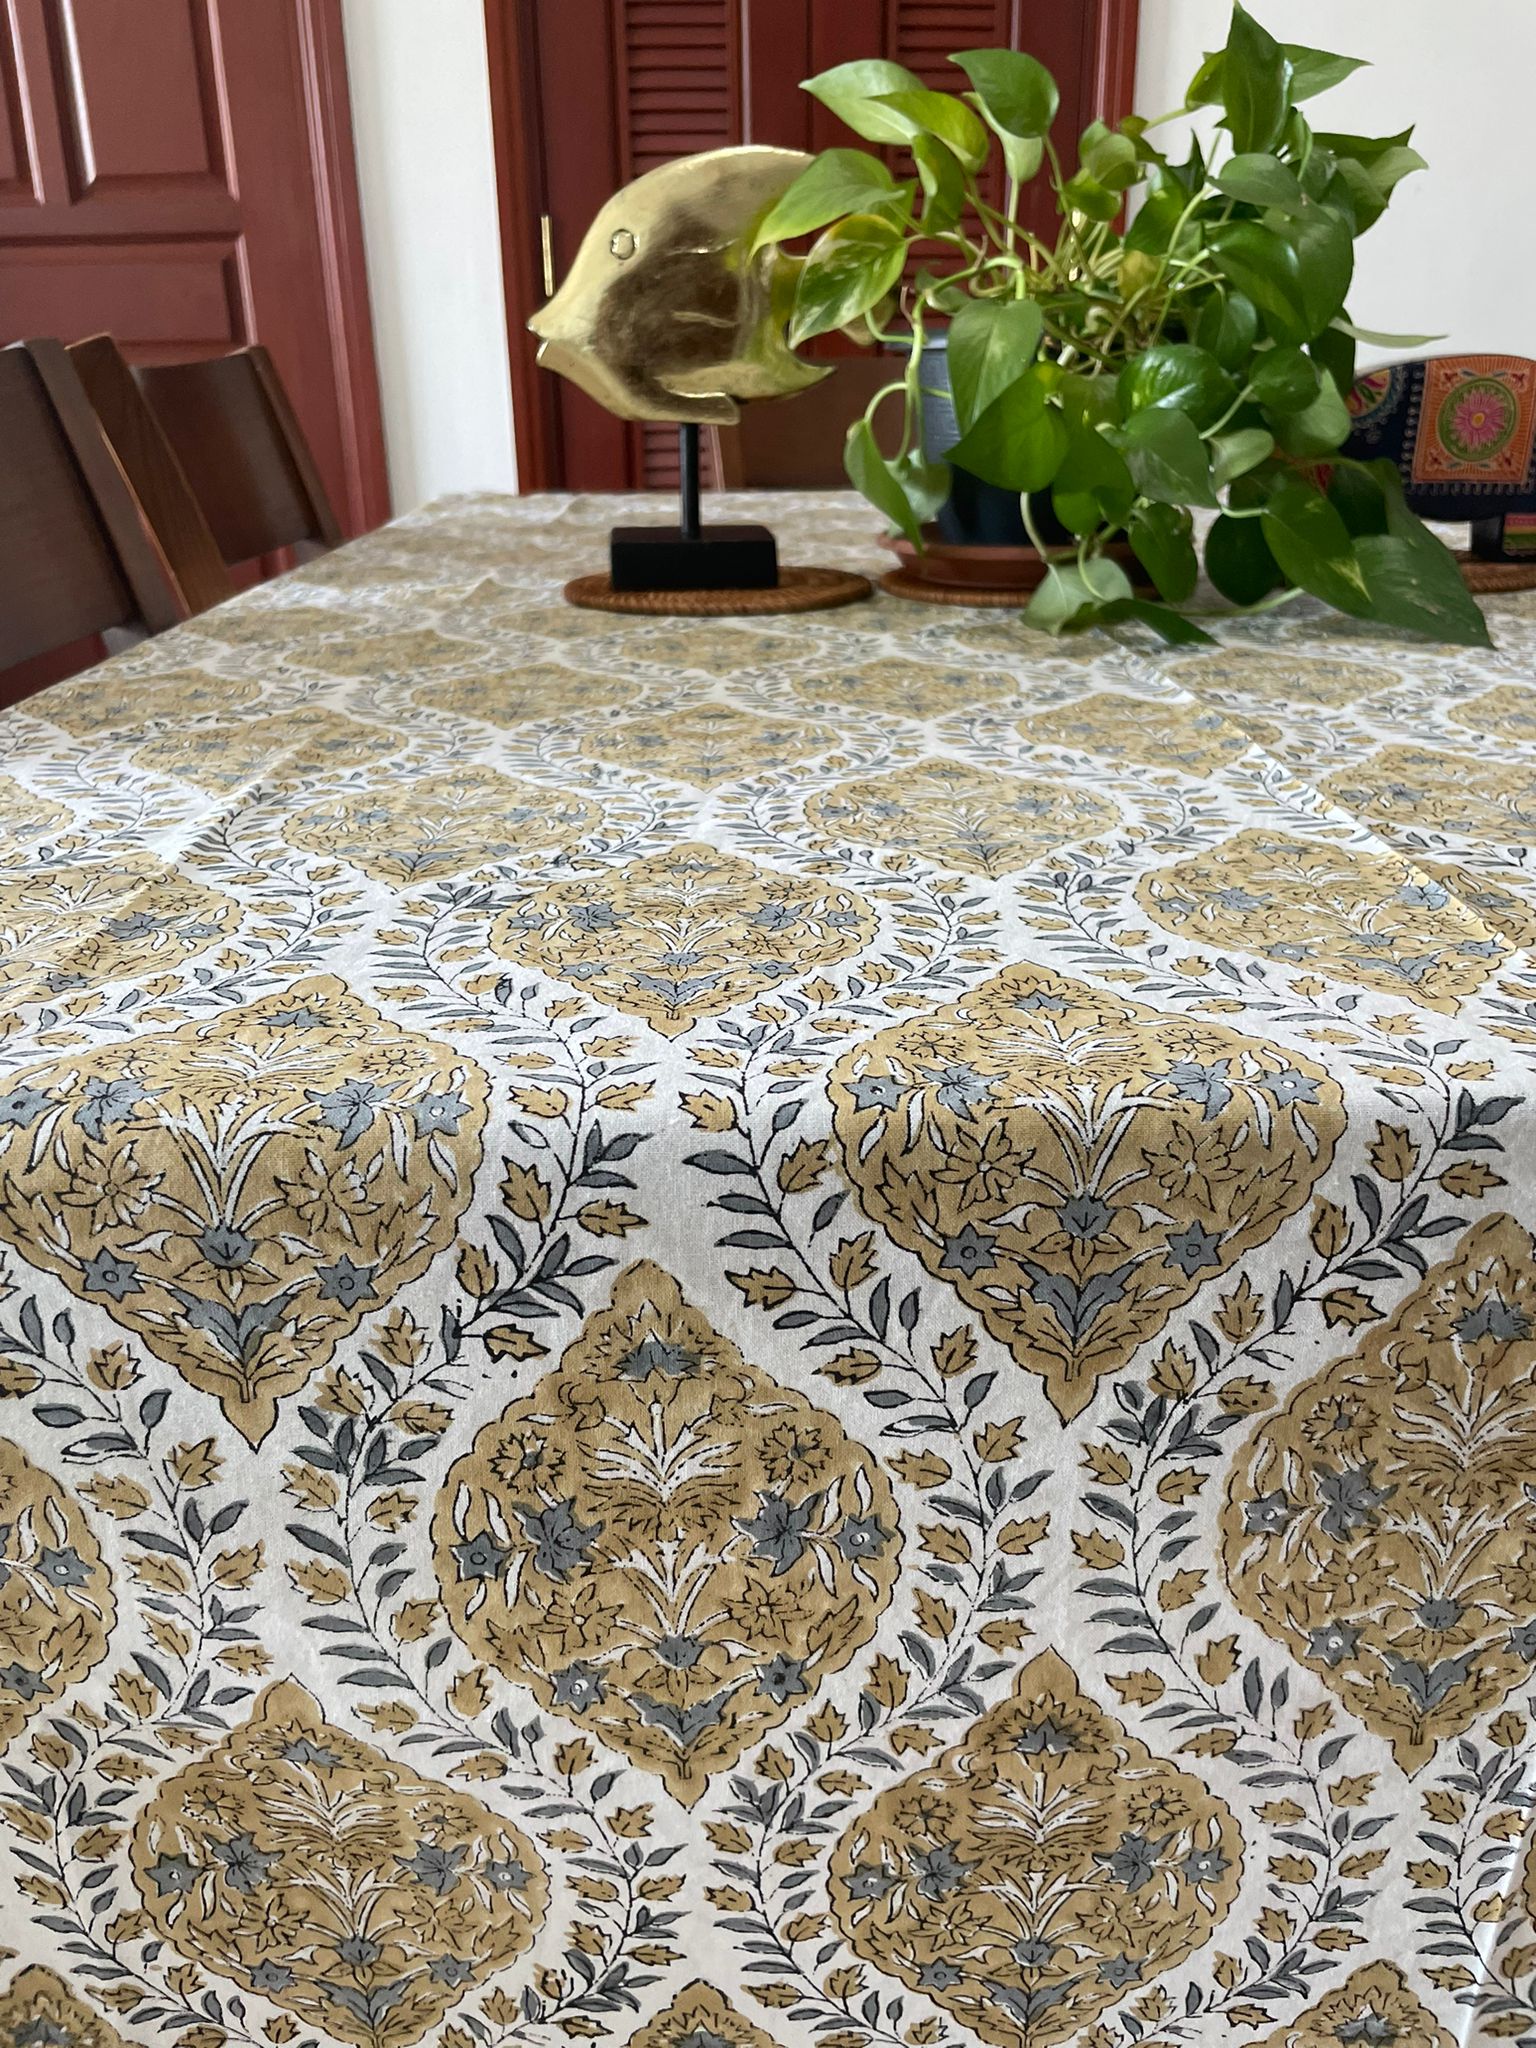 Super nice and amazing dining table cover for women